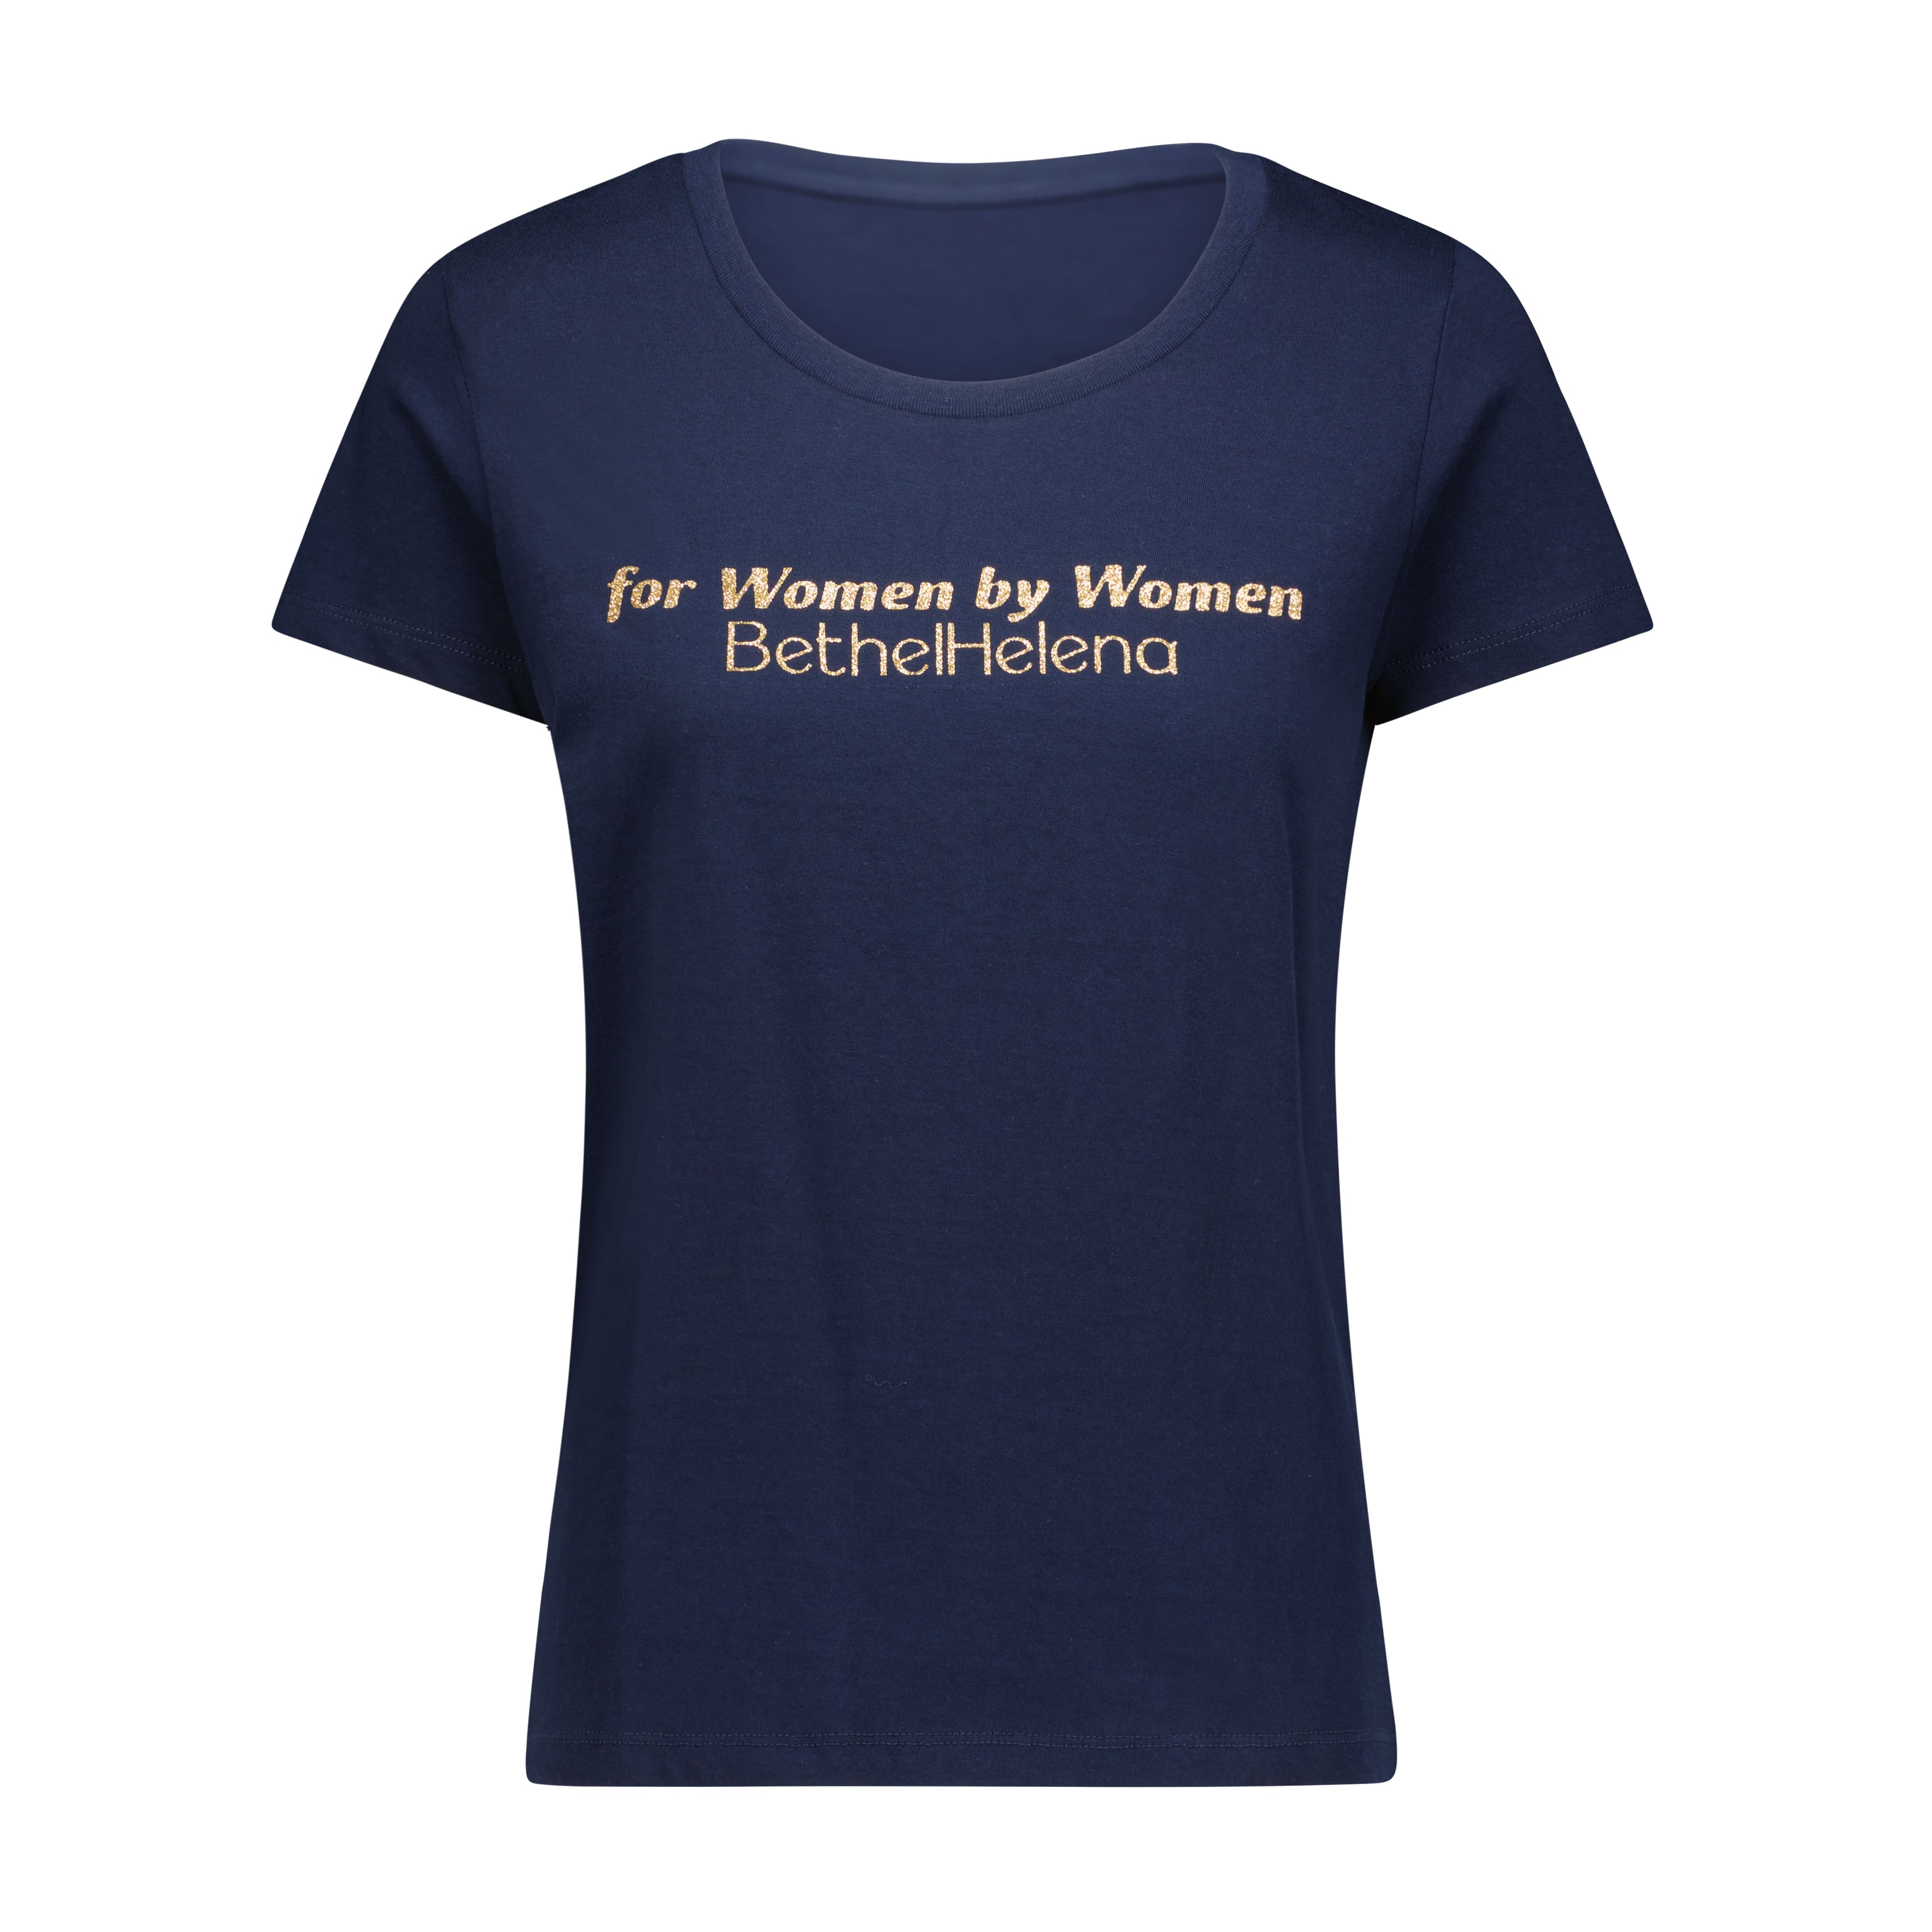 For Women By Women Tee, Gold Text